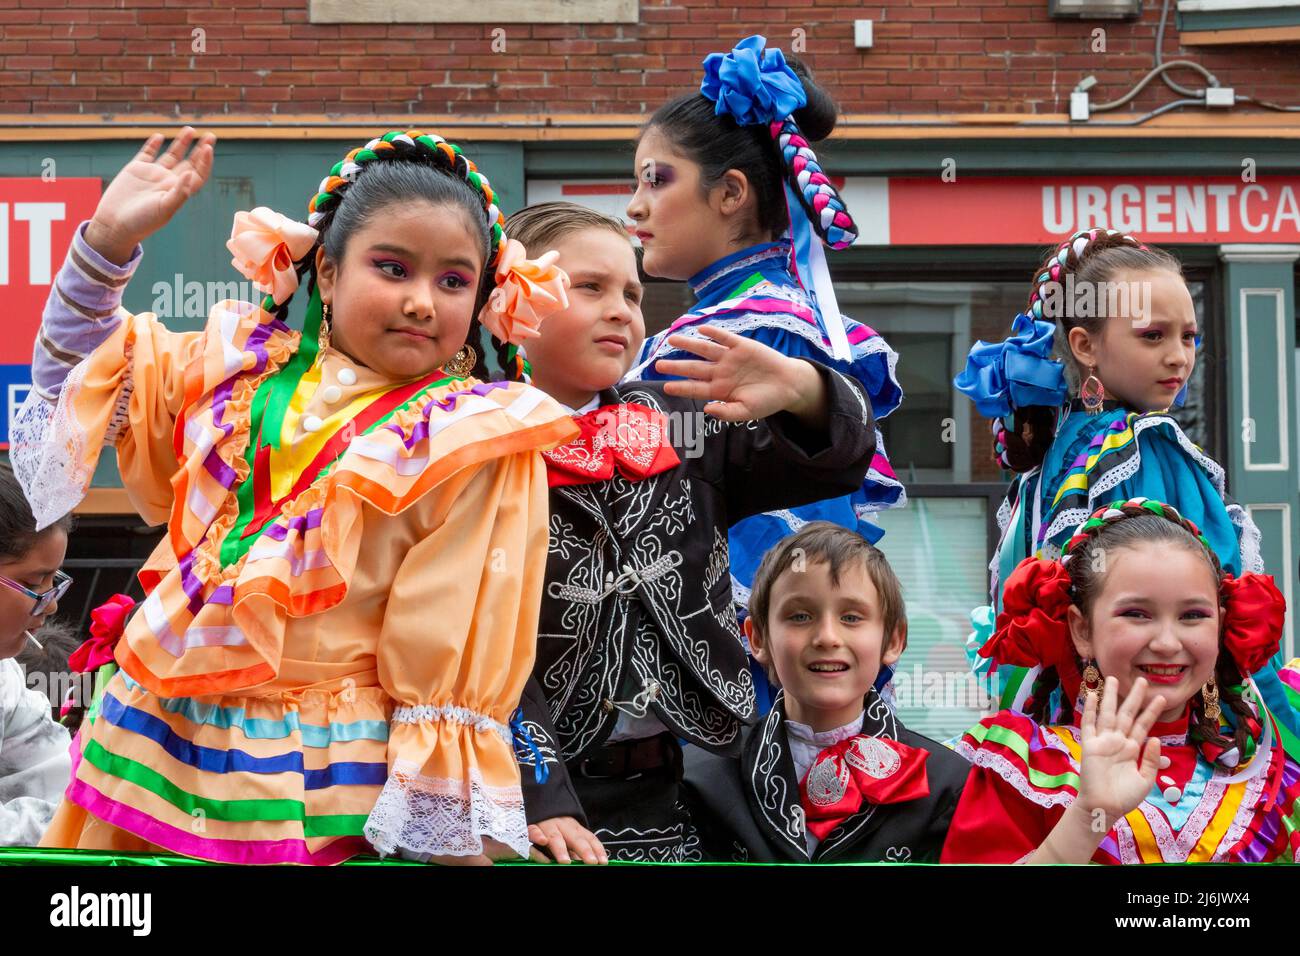 Detroit, Michigan USA - 1 May 2022 - Costumed children ride on a float in the Cinco de Mayo parade in Detroit's Mexican-American neighborhood. Thousands watched the annual parade, which returned in 2022 after a two-year hiatus due to the pandemic. Cinco de Mayo celebrates a Mexican victory over the French on May 5, 1862. Credit: Jim West/Alamy Live News Stock Photo